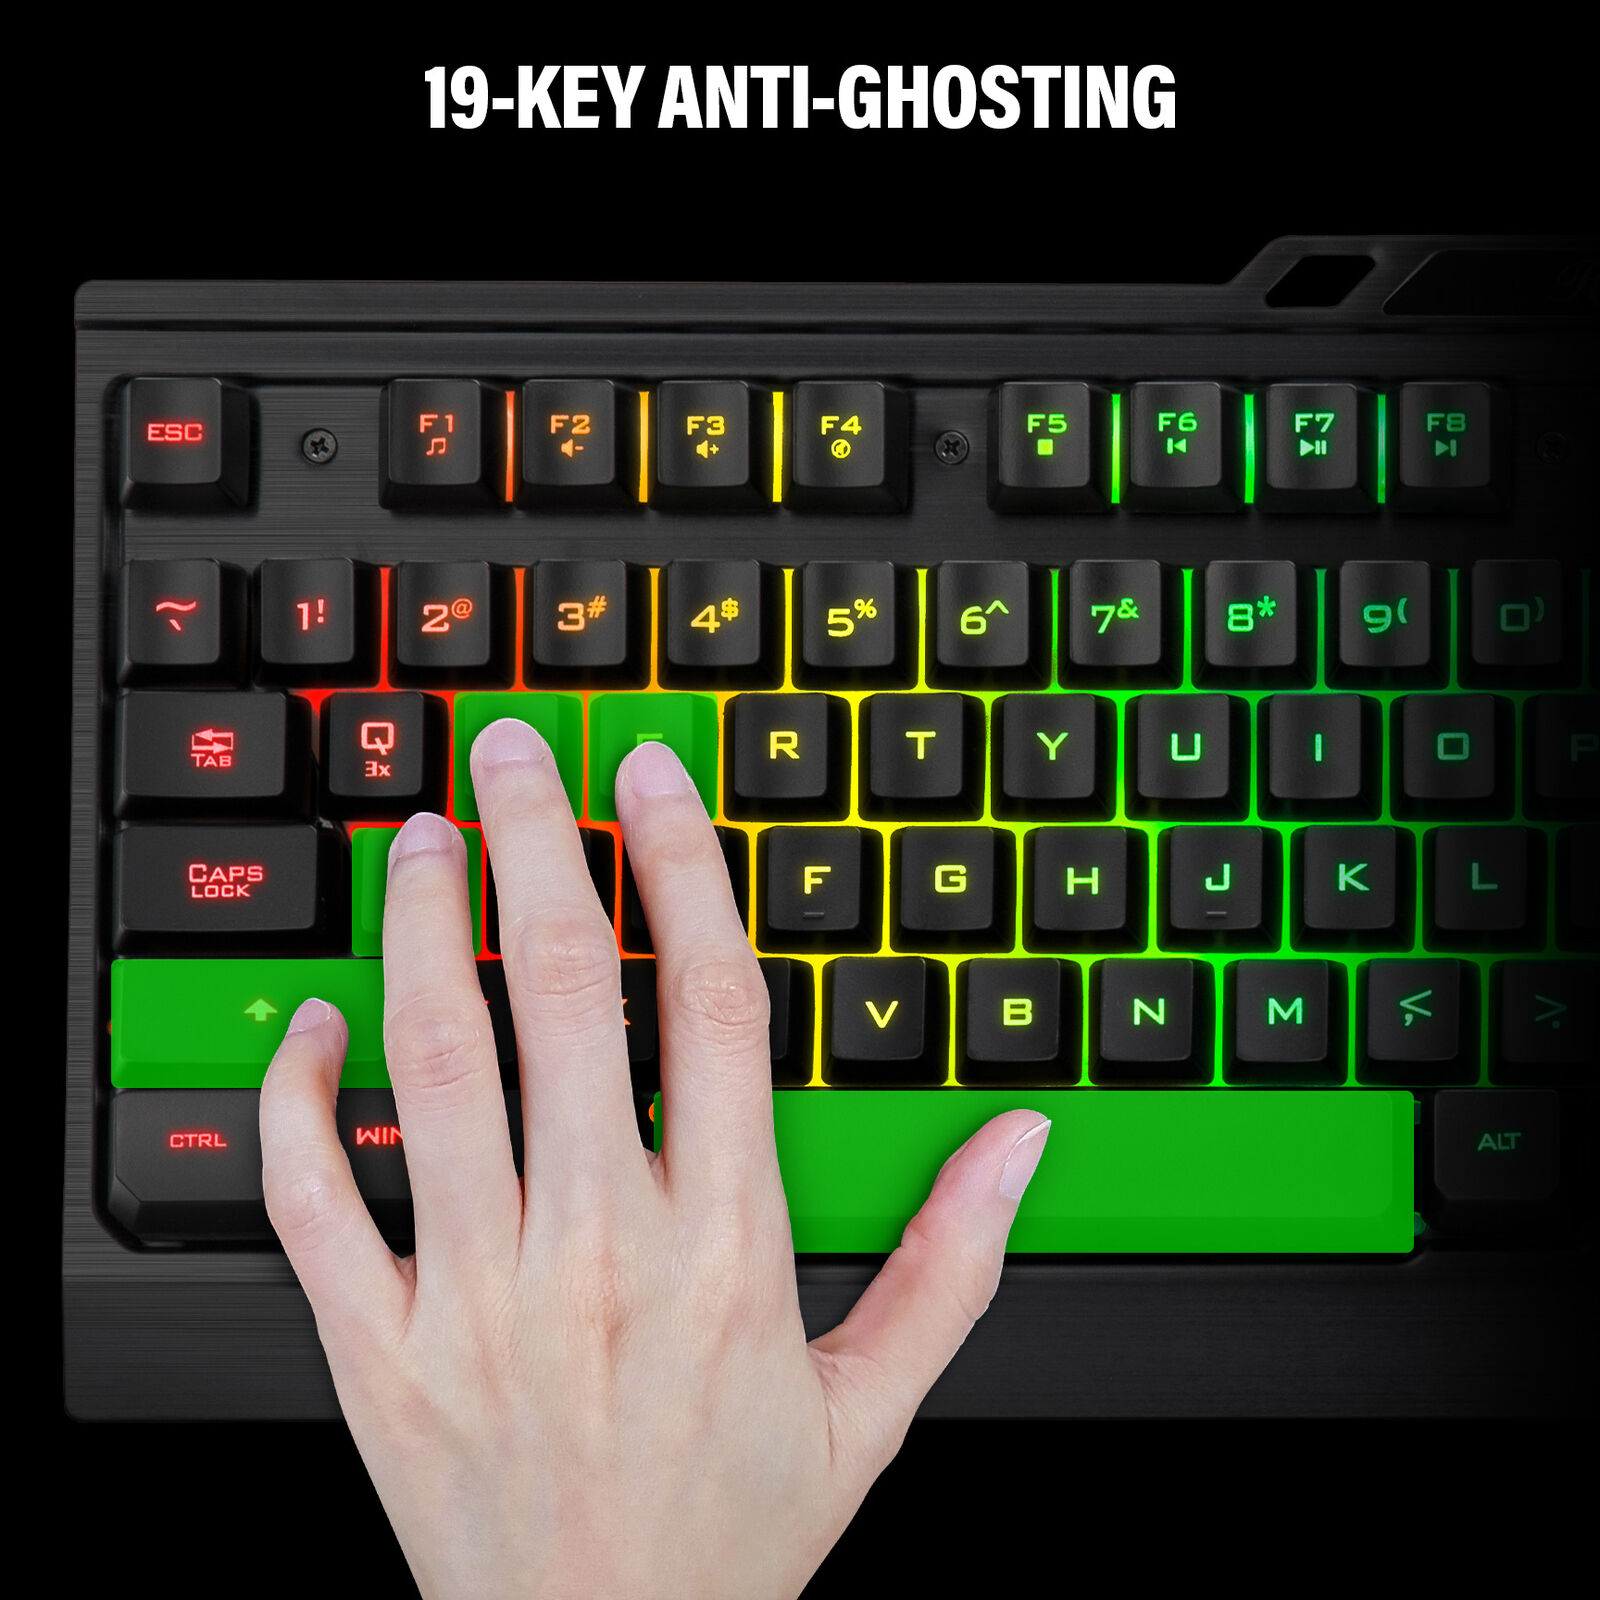 Hold down various key combinations to check for ghosting on your keyboard.